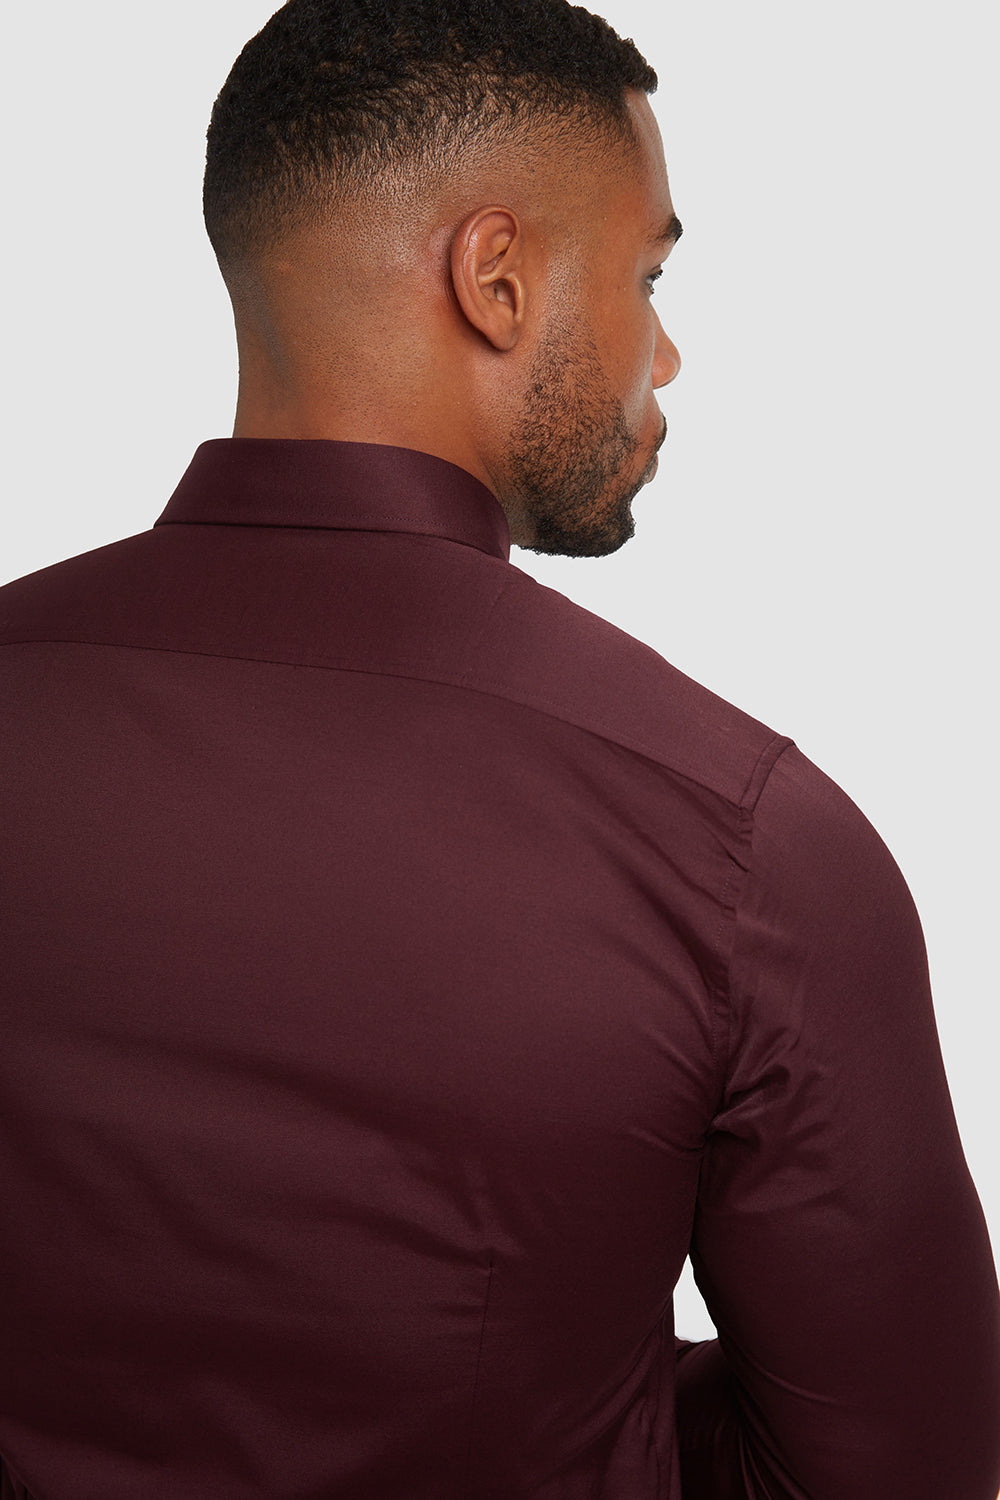 Muscle Fit Signature Shirt - TAILORED ATHLETE 2.0 in Burgundy - USA